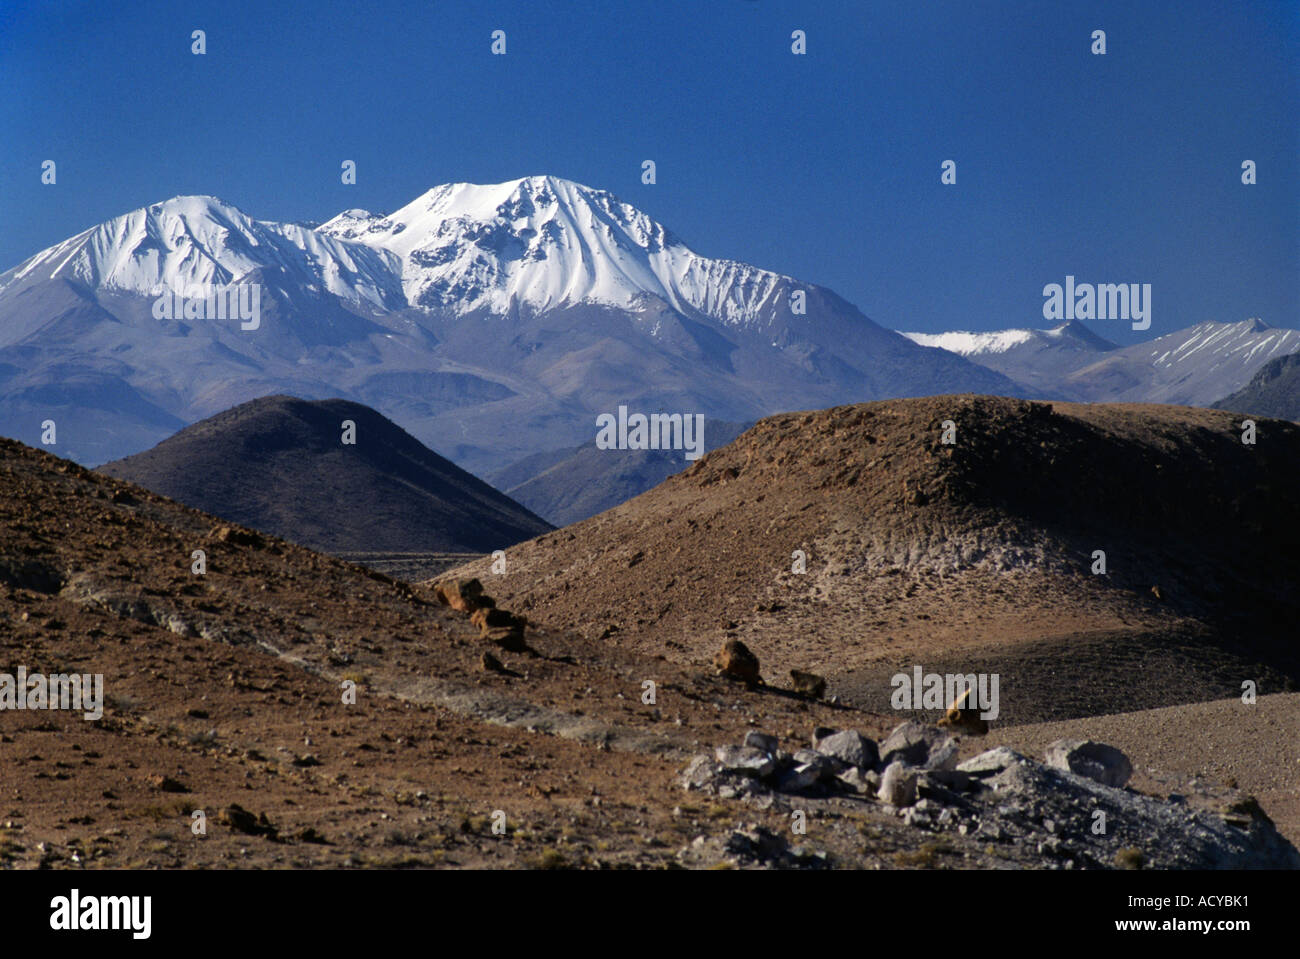 Mount TAAPACA reaches a height of 5800 M as in ascends from the ATACAMA desert of NORTHERN CHILE Stock Photo